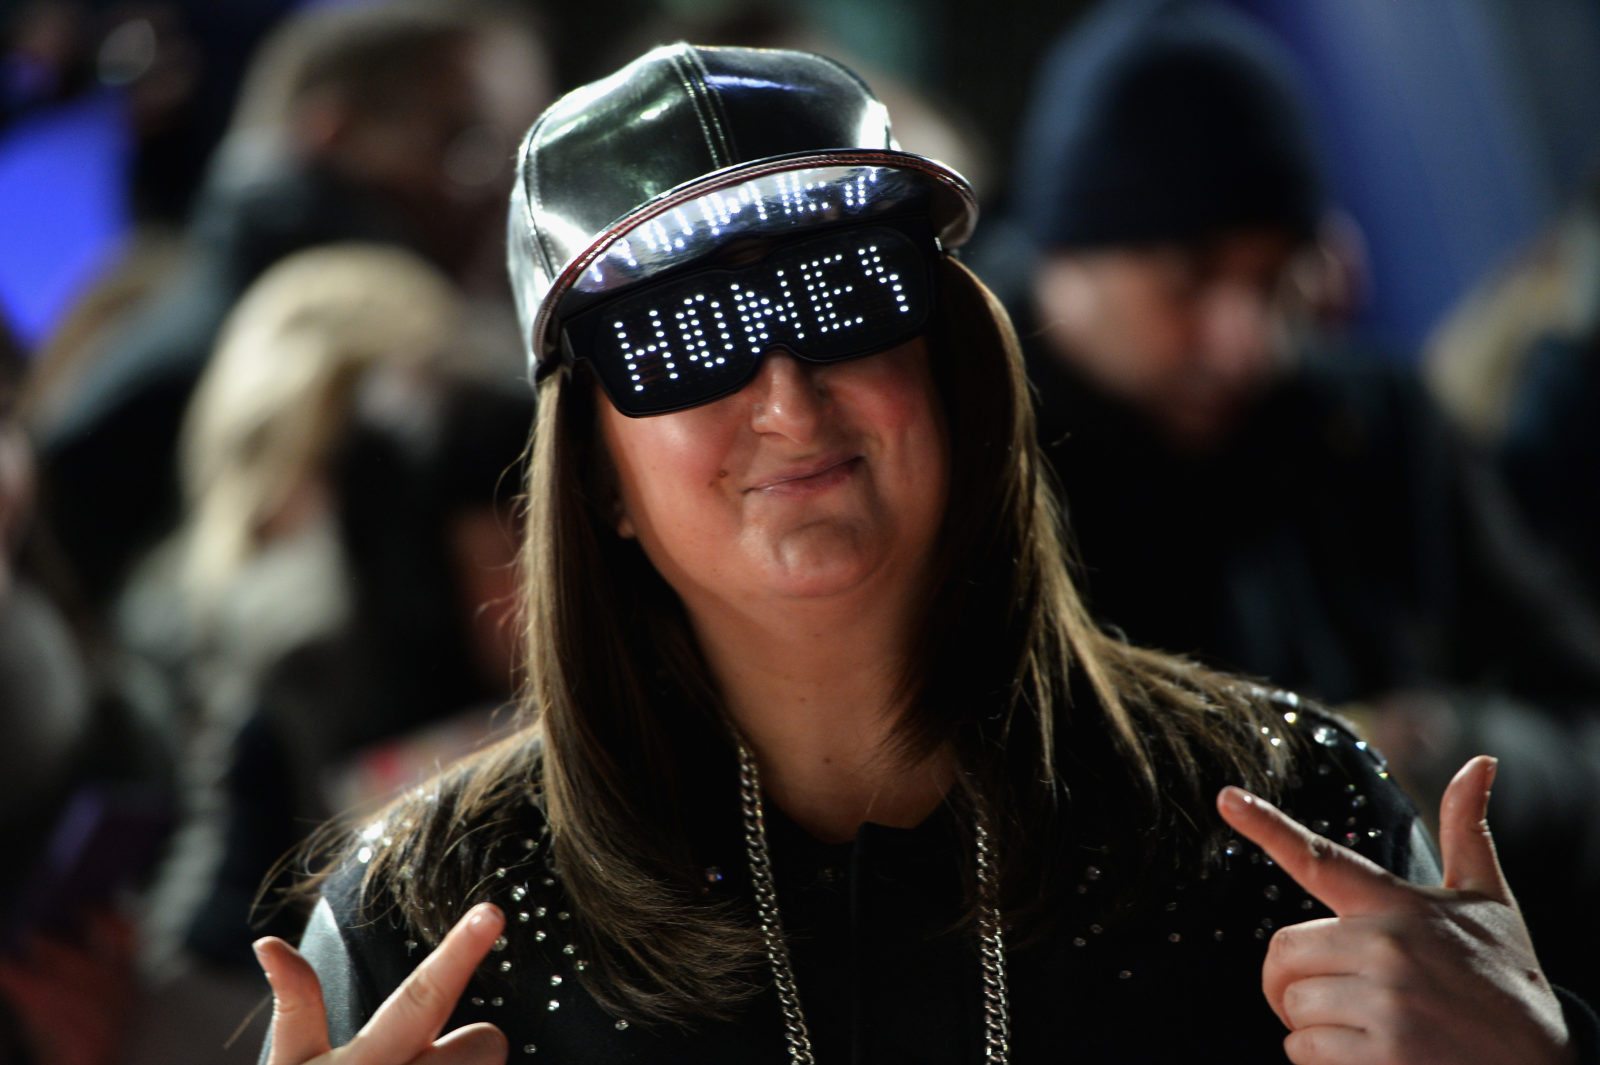 X Factor star Honey G reveals she is a lesbian and is 